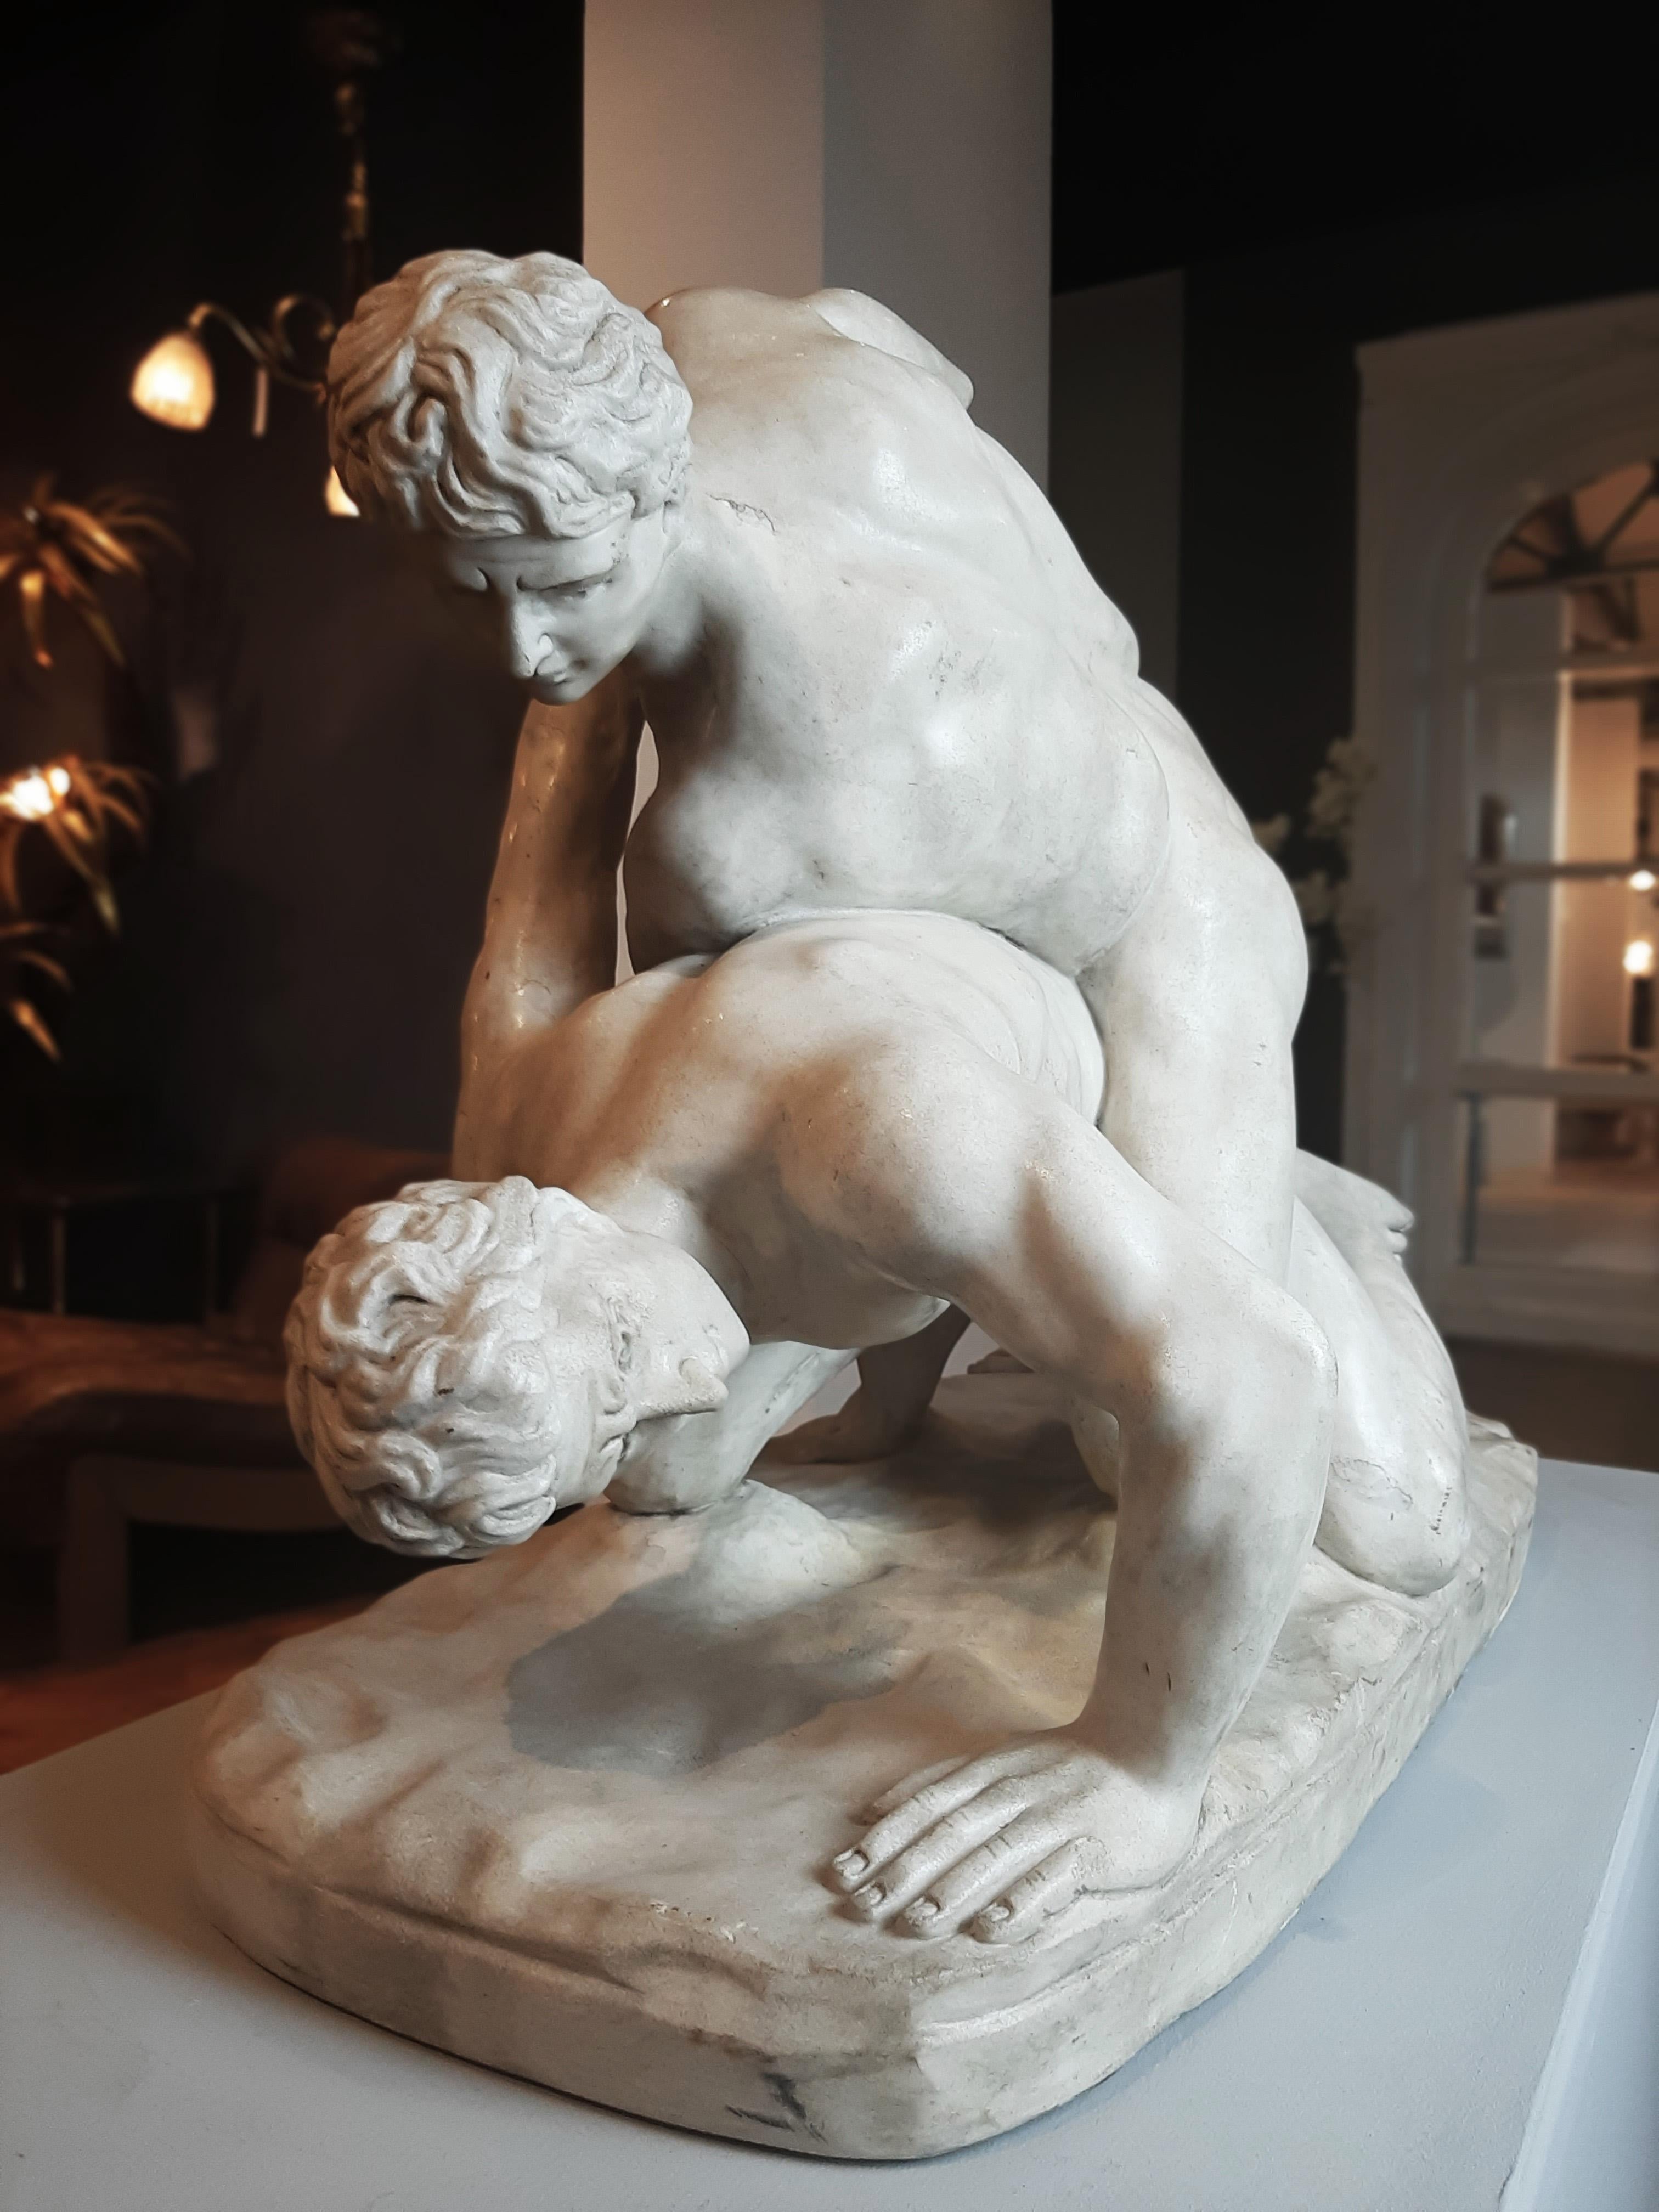 Carrara Marble 19th Century Grand Tour Marble Sculpture after the Antique Uffizi Wrestlers